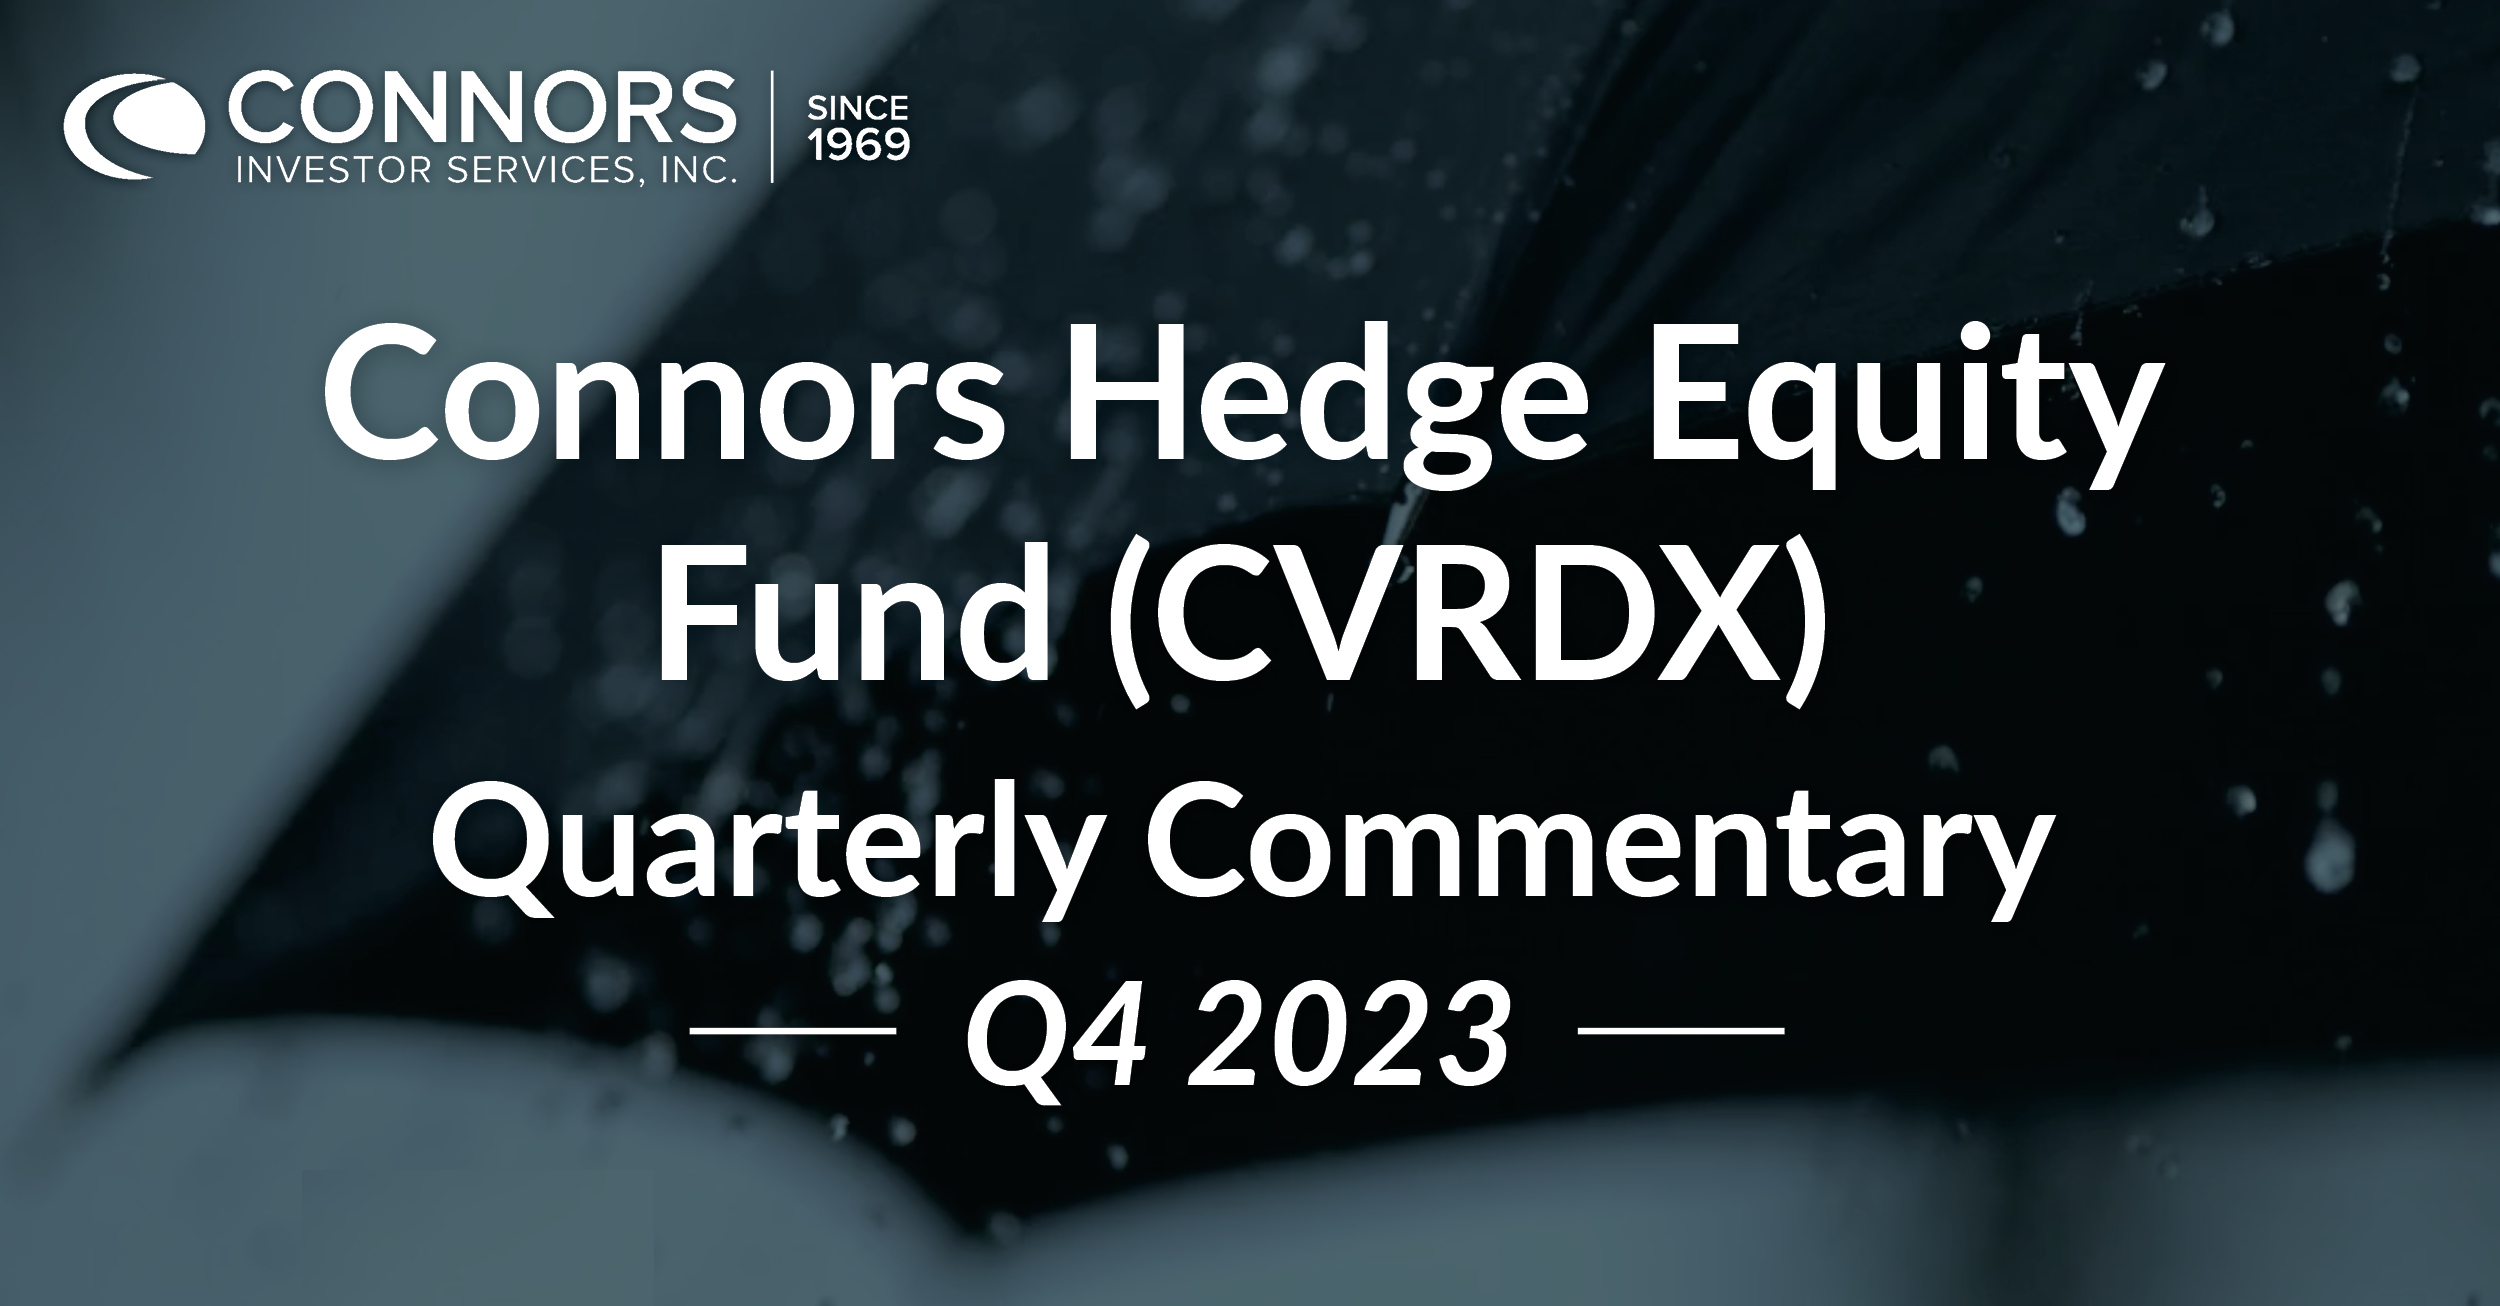 2023 Q4 Connors Hedged Equity Fund (CVRDX) Quarterly Commentary